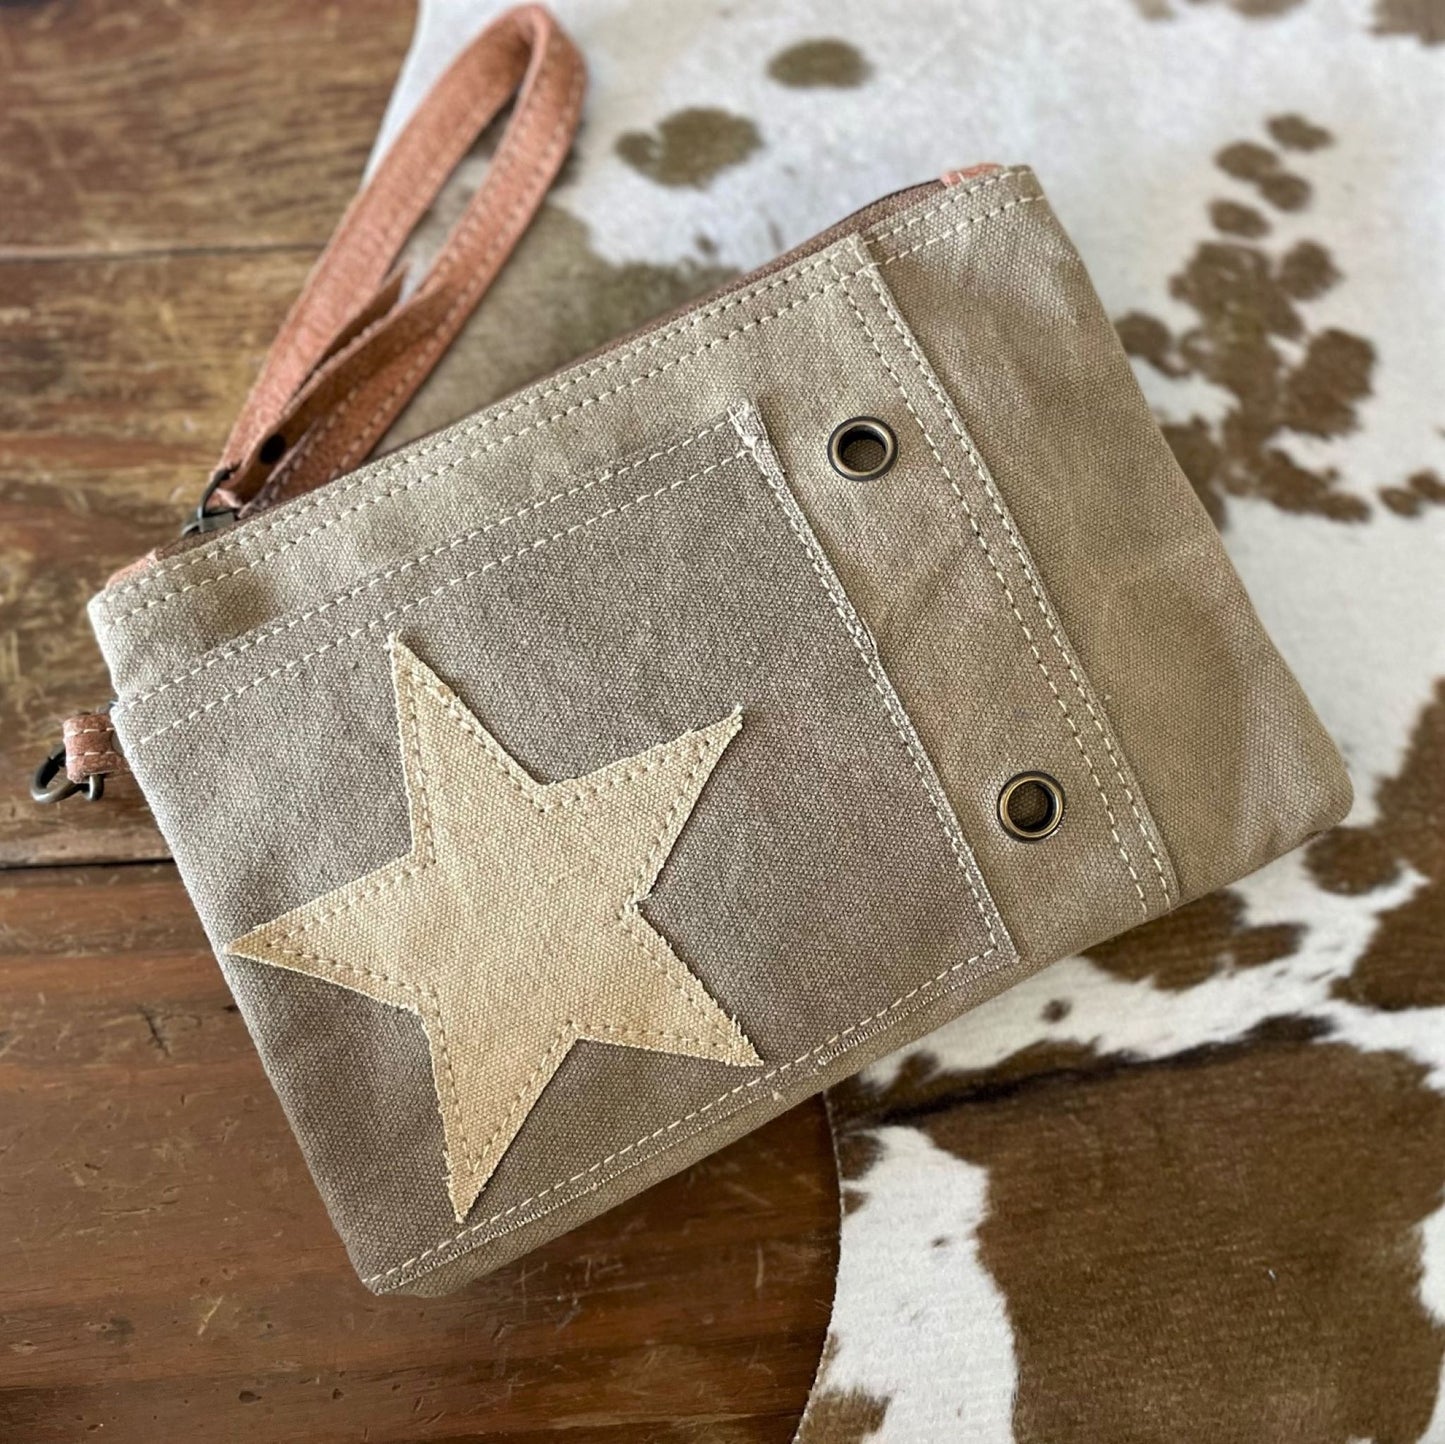 UpCycled Star Wristlet Purse - Stand Alone or Great Add to Another Bag!